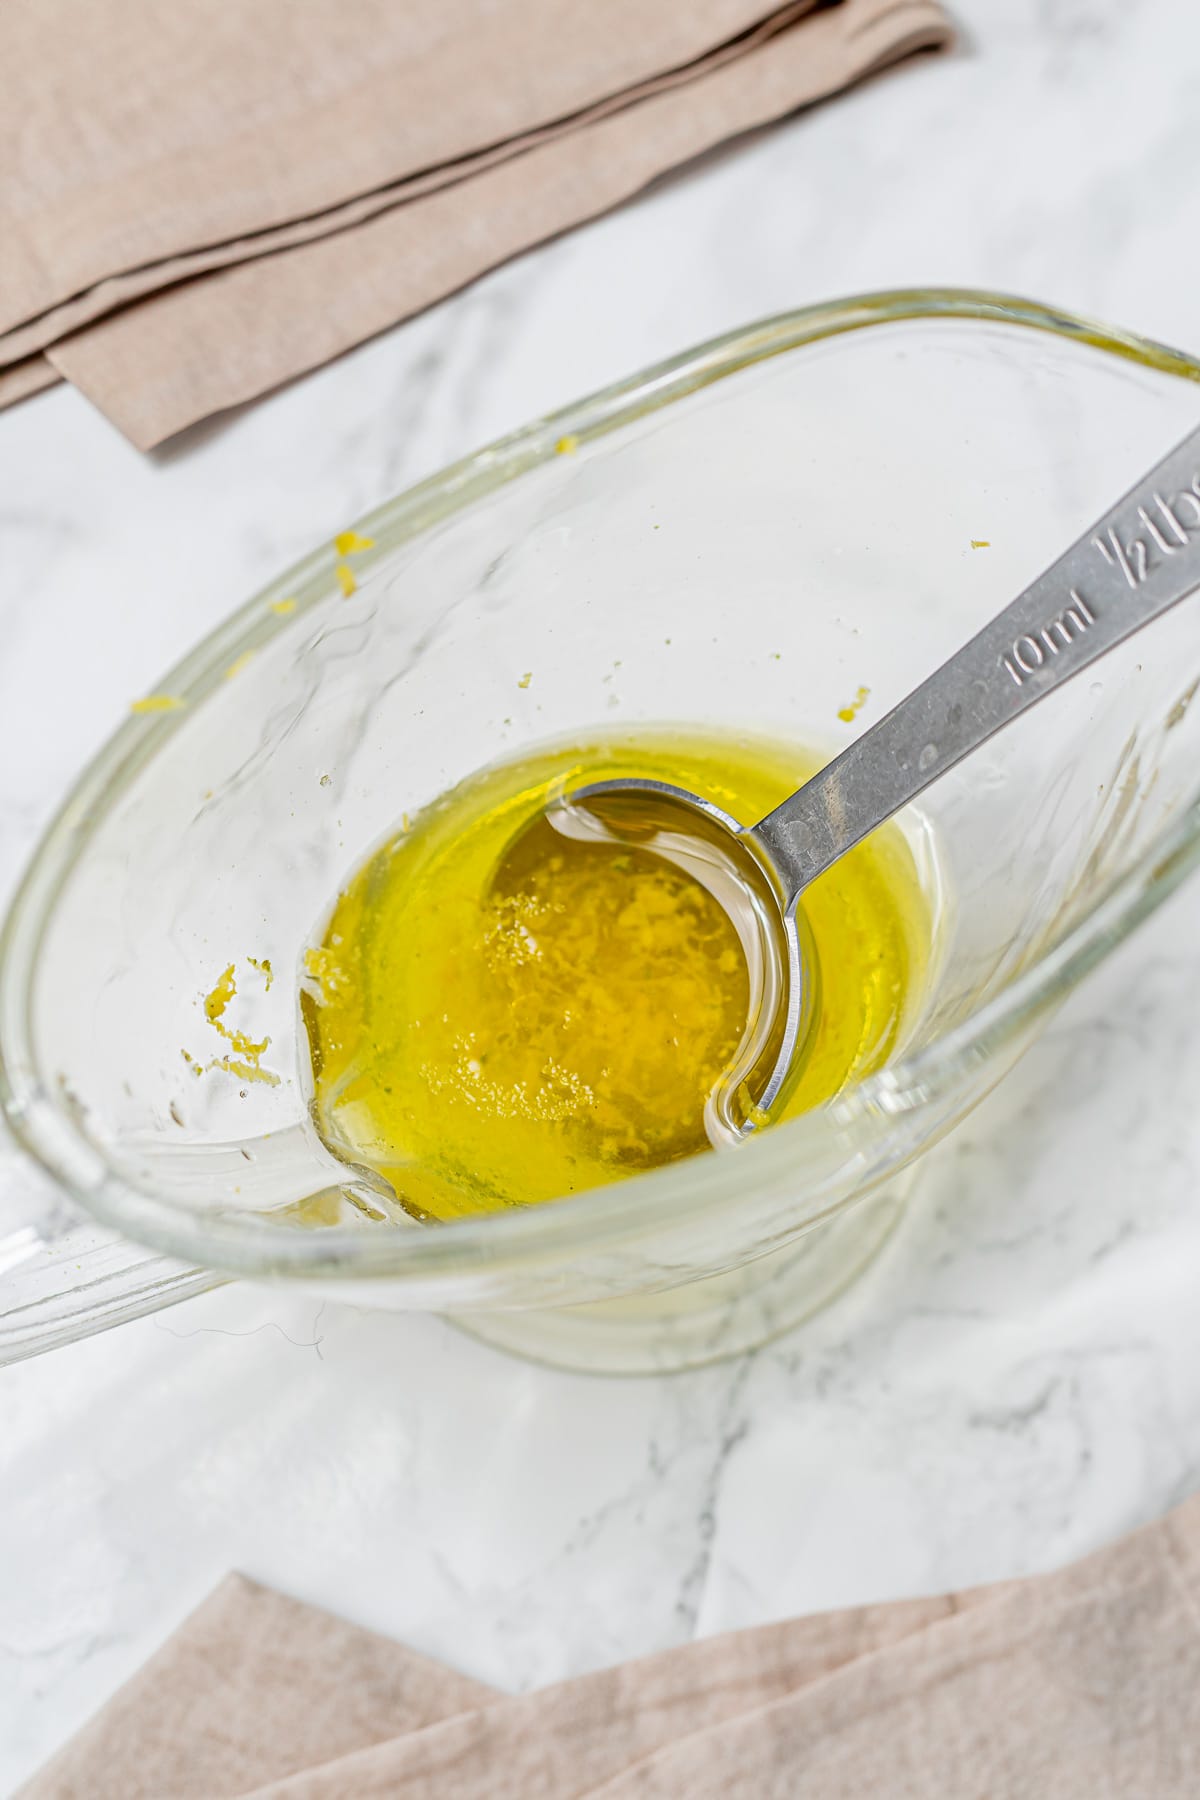 Lemon zest and olive oil dressing in a glass measuring cup.